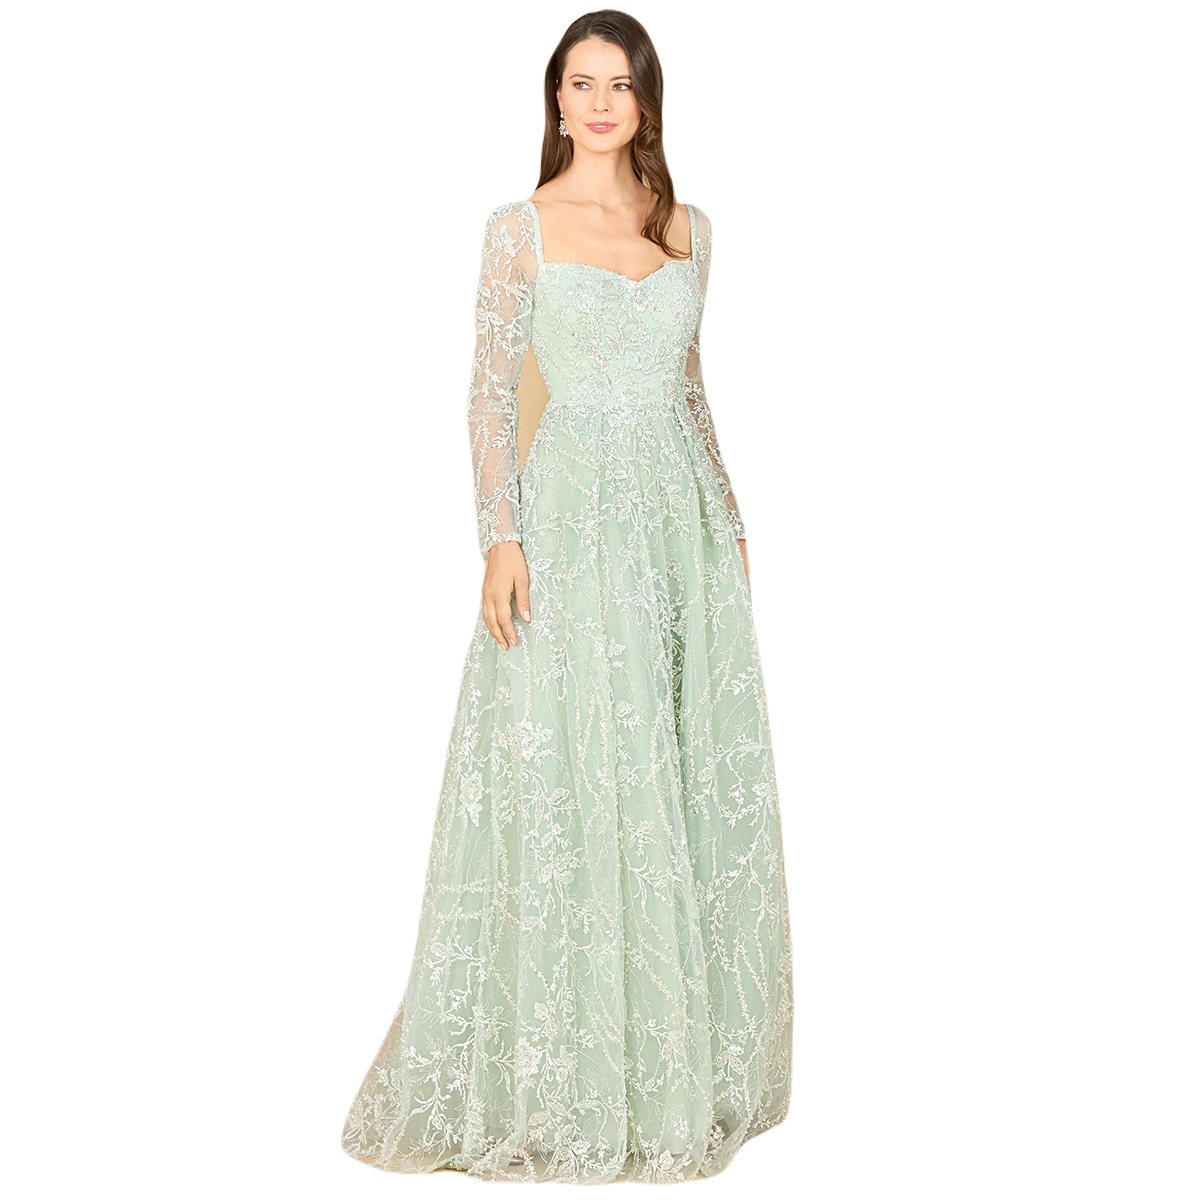 1950s History of Prom, Party, Evening and Formal Dresses Lara Womens Long Sleeve Beaded Lace Gown - Dusty sage $858.00 AT vintagedancer.com